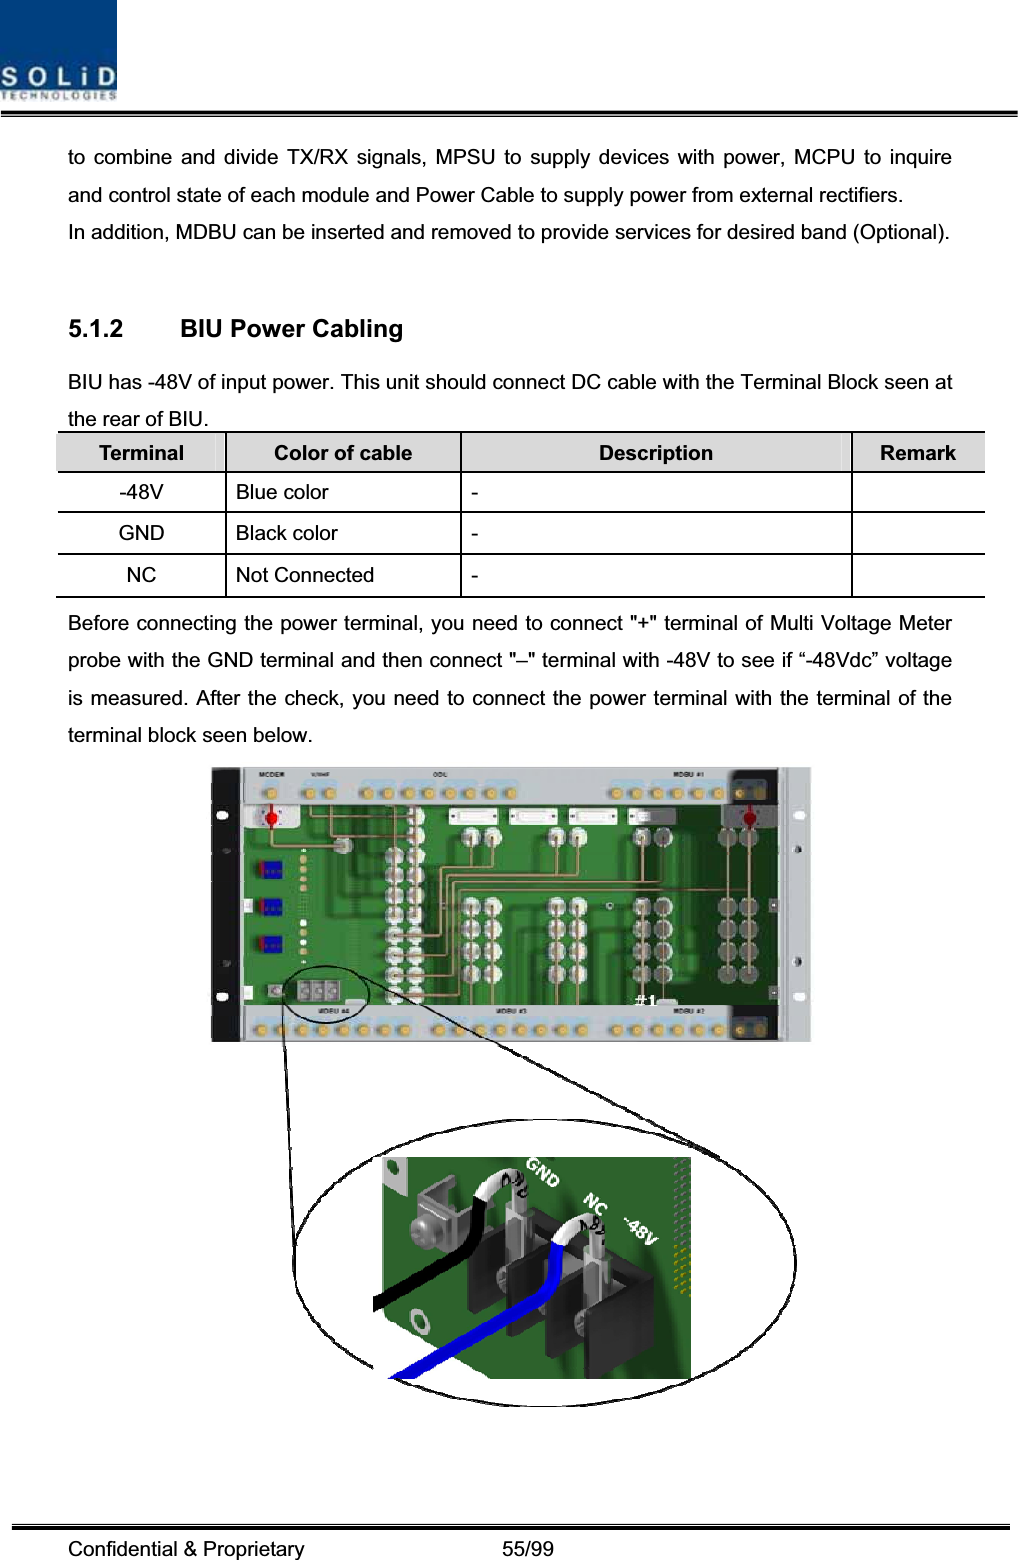 Confidential &amp; Proprietary                   55/99 to combine and divide TX/RX signals, MPSU to supply devices with power, MCPU to inquire and control state of each module and Power Cable to supply power from external rectifiers. In addition, MDBU can be inserted and removed to provide services for desired band (Optional). 5.1.2  BIU Power Cabling BIU has -48V of input power. This unit should connect DC cable with the Terminal Block seen at the rear of BIU. Terminal  Color of cable  Description  Remark -48V Blue color  -   GND Black color  -   NC Not Connected  -   Before connecting the power terminal, you need to connect &quot;+&quot; terminal of Multi Voltage Meter probe with the GND terminal and then connect &quot;–&quot; terminal with -48V to see if “-48Vdc” voltage is measured. After the check, you need to connect the power terminal with the terminal of the terminal block seen below. 